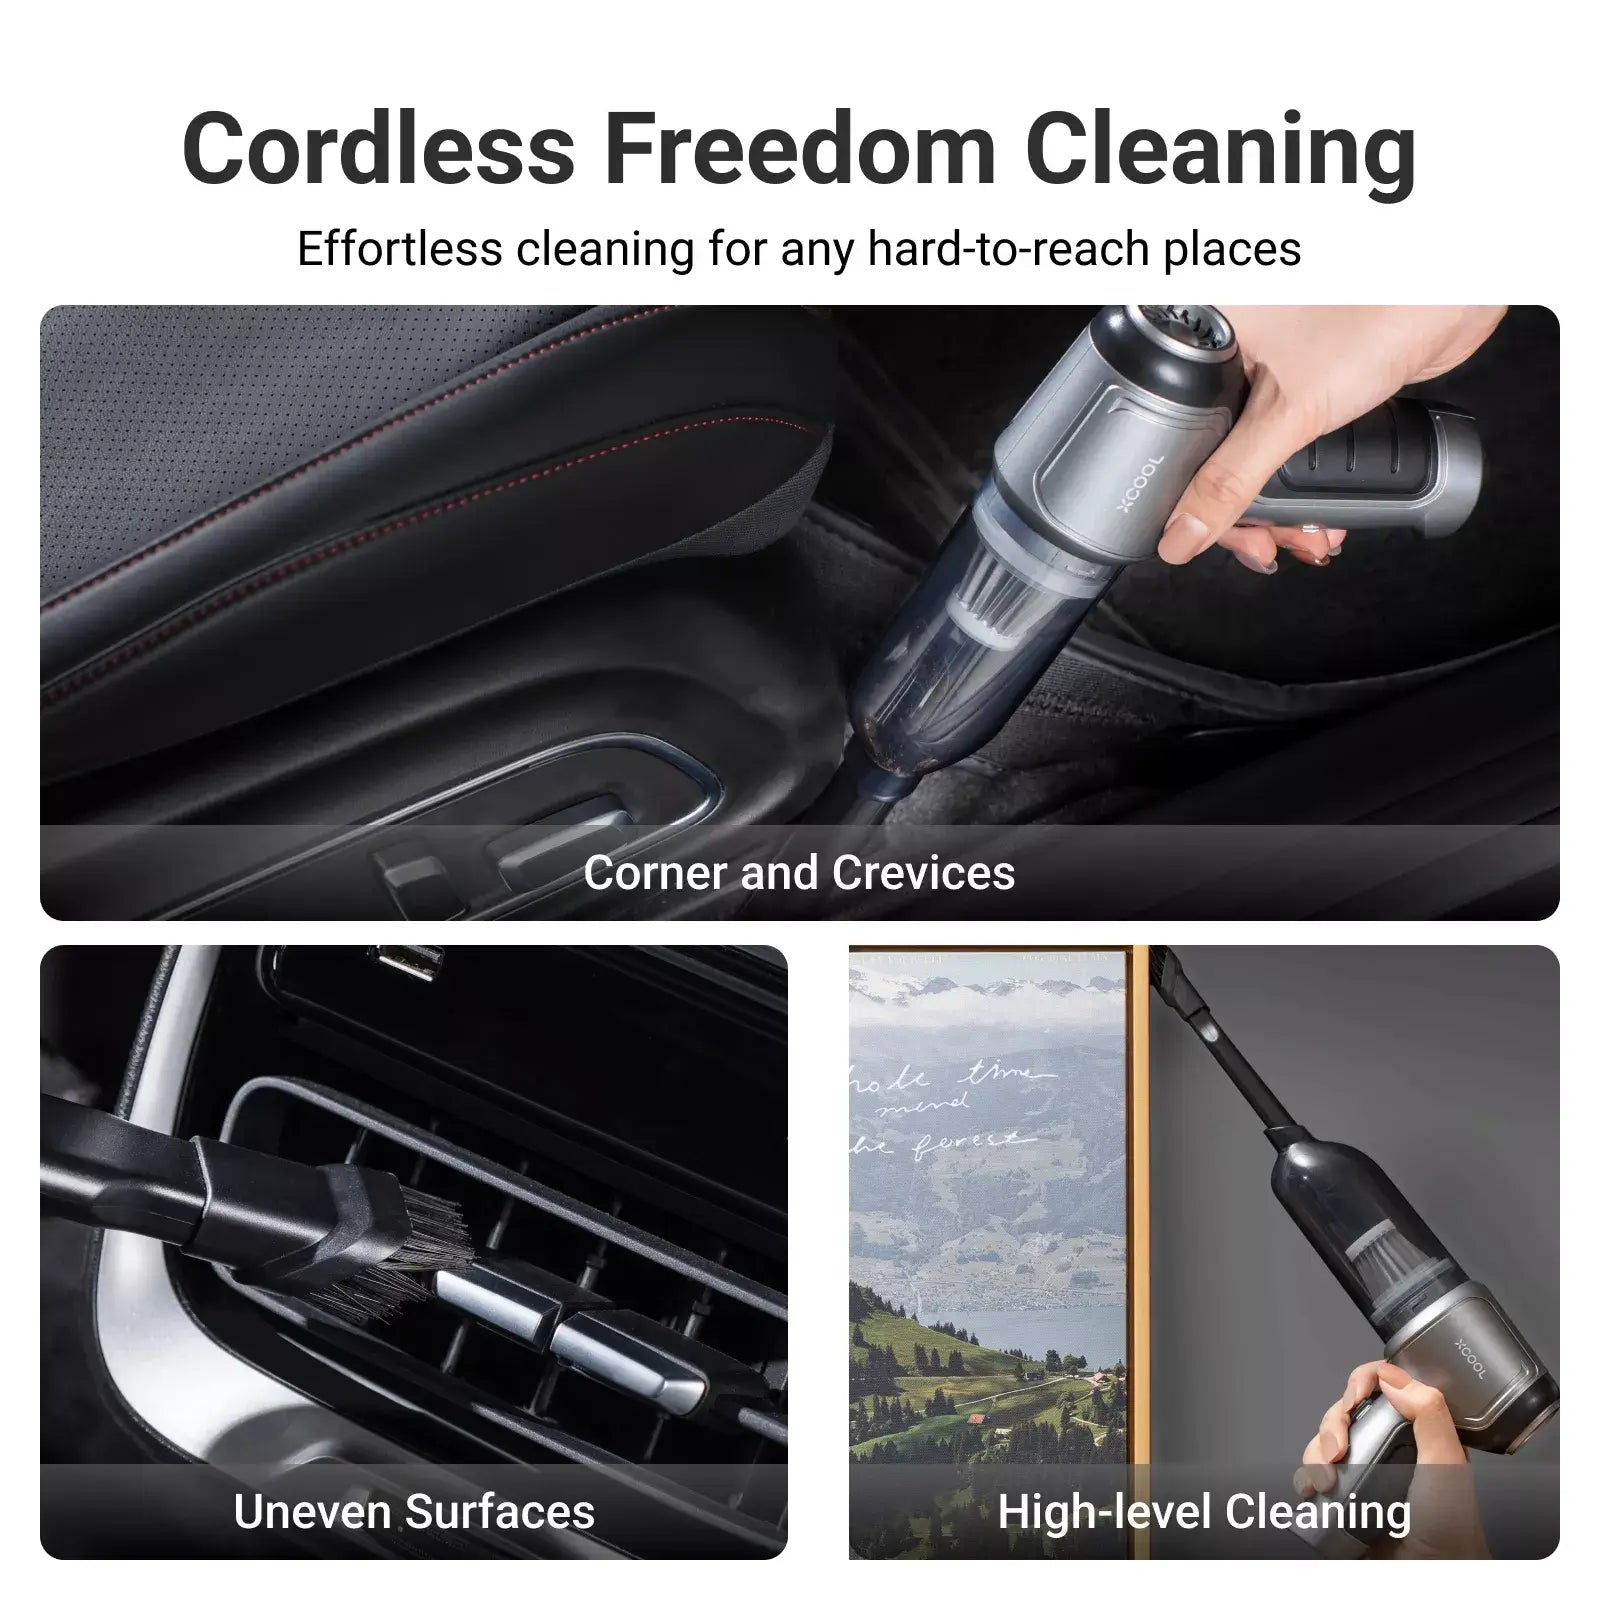 xCool Small Wireless Handheld Car Vacuum Cleaner for Car, Home, Pet